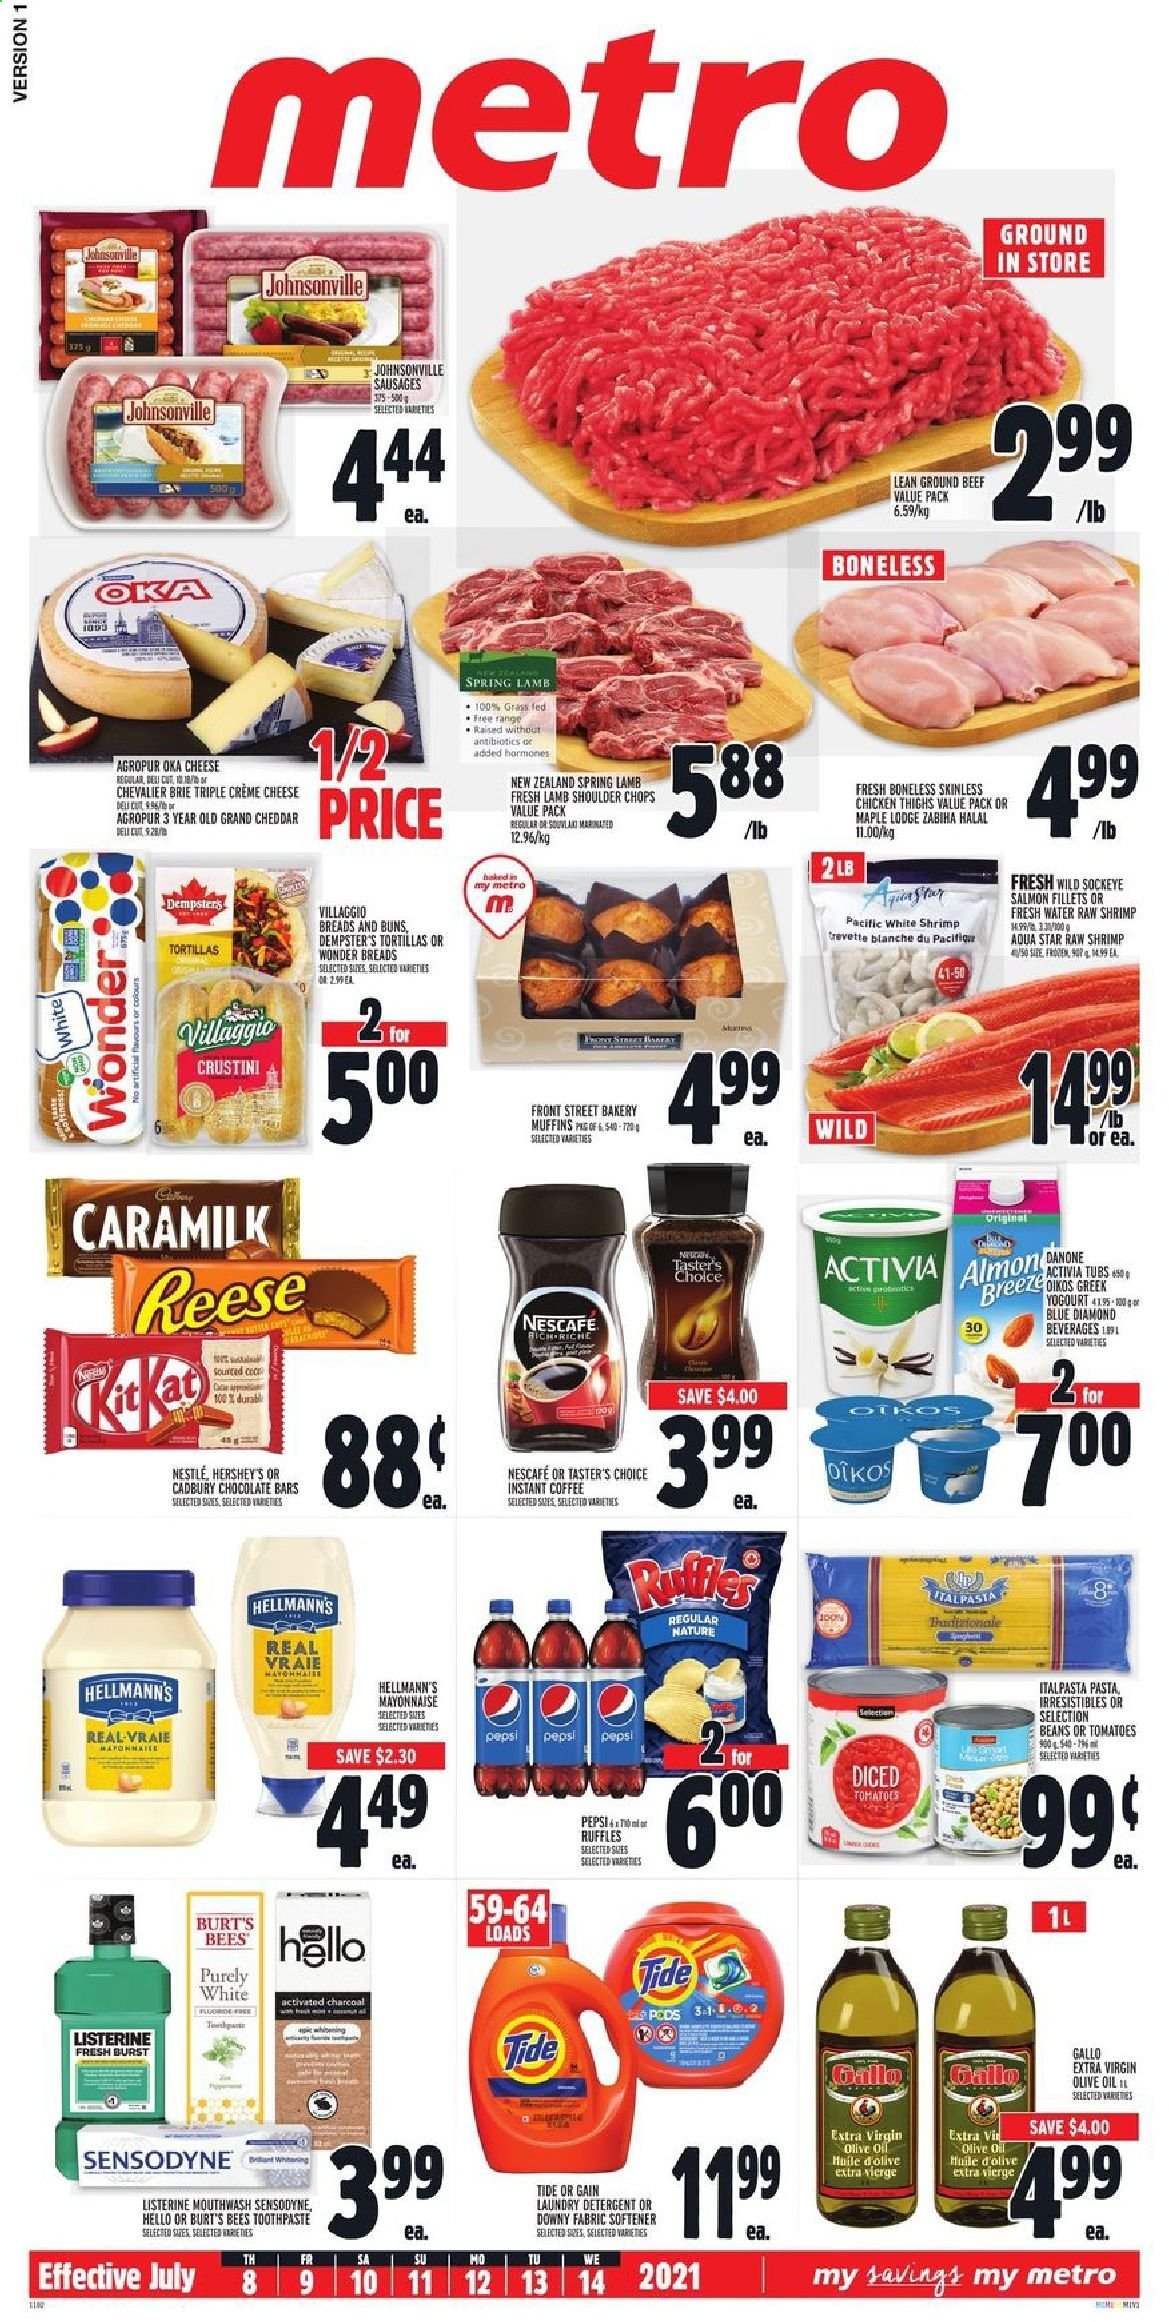 thumbnail - Metro Flyer - July 08, 2021 - July 14, 2021 - Sales products - tortillas, buns, muffin, tomatoes, salmon, salmon fillet, shrimps, pasta, Johnsonville, sausage, cheese, brie, Activia, Oikos, mayonnaise, Hellmann’s, Hershey's, Cadbury, chocolate bar, Ruffles, extra virgin olive oil, olive oil, oil, Blue Diamond, Pepsi, instant coffee, chicken thighs, chicken, beef meat, ground beef, lamb meat, lamb shoulder, Gain, Tide, fabric softener, laundry detergent, Downy Laundry, toothpaste, mouthwash, activated charcoal, Danone, Nestlé, Listerine, Sensodyne, Nescafé. Page 1.